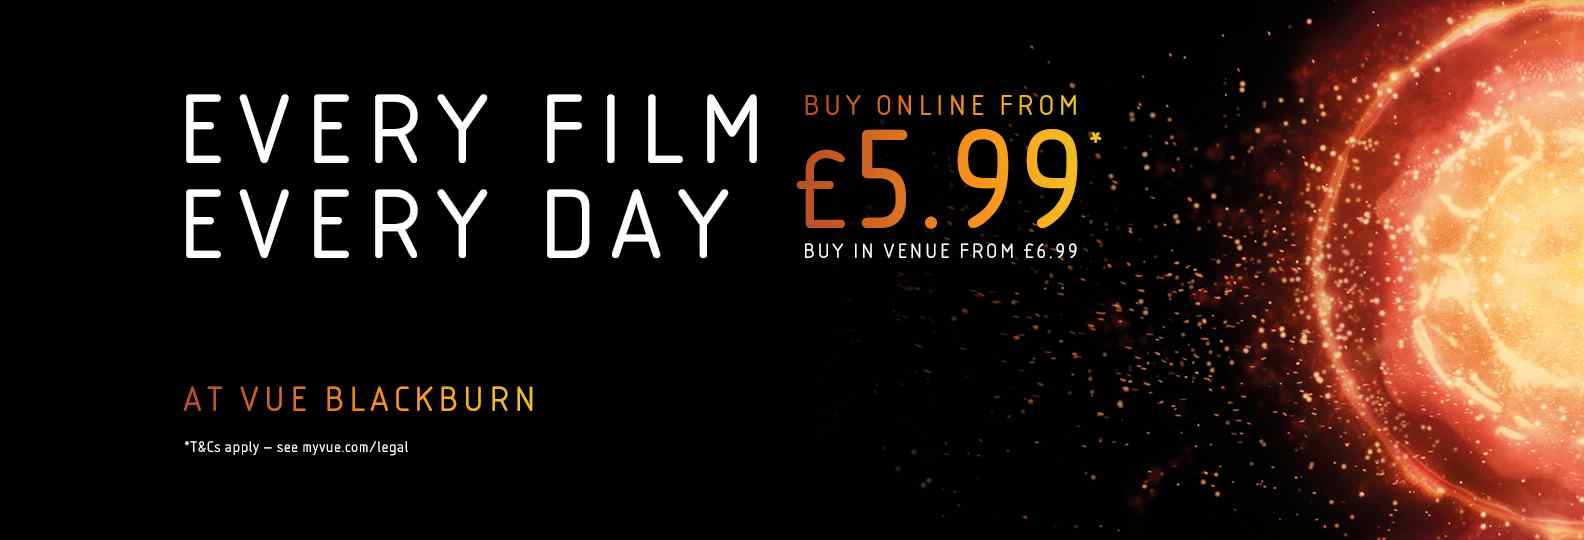 Vue Blackburn | Every Film, Every Day from £5.99